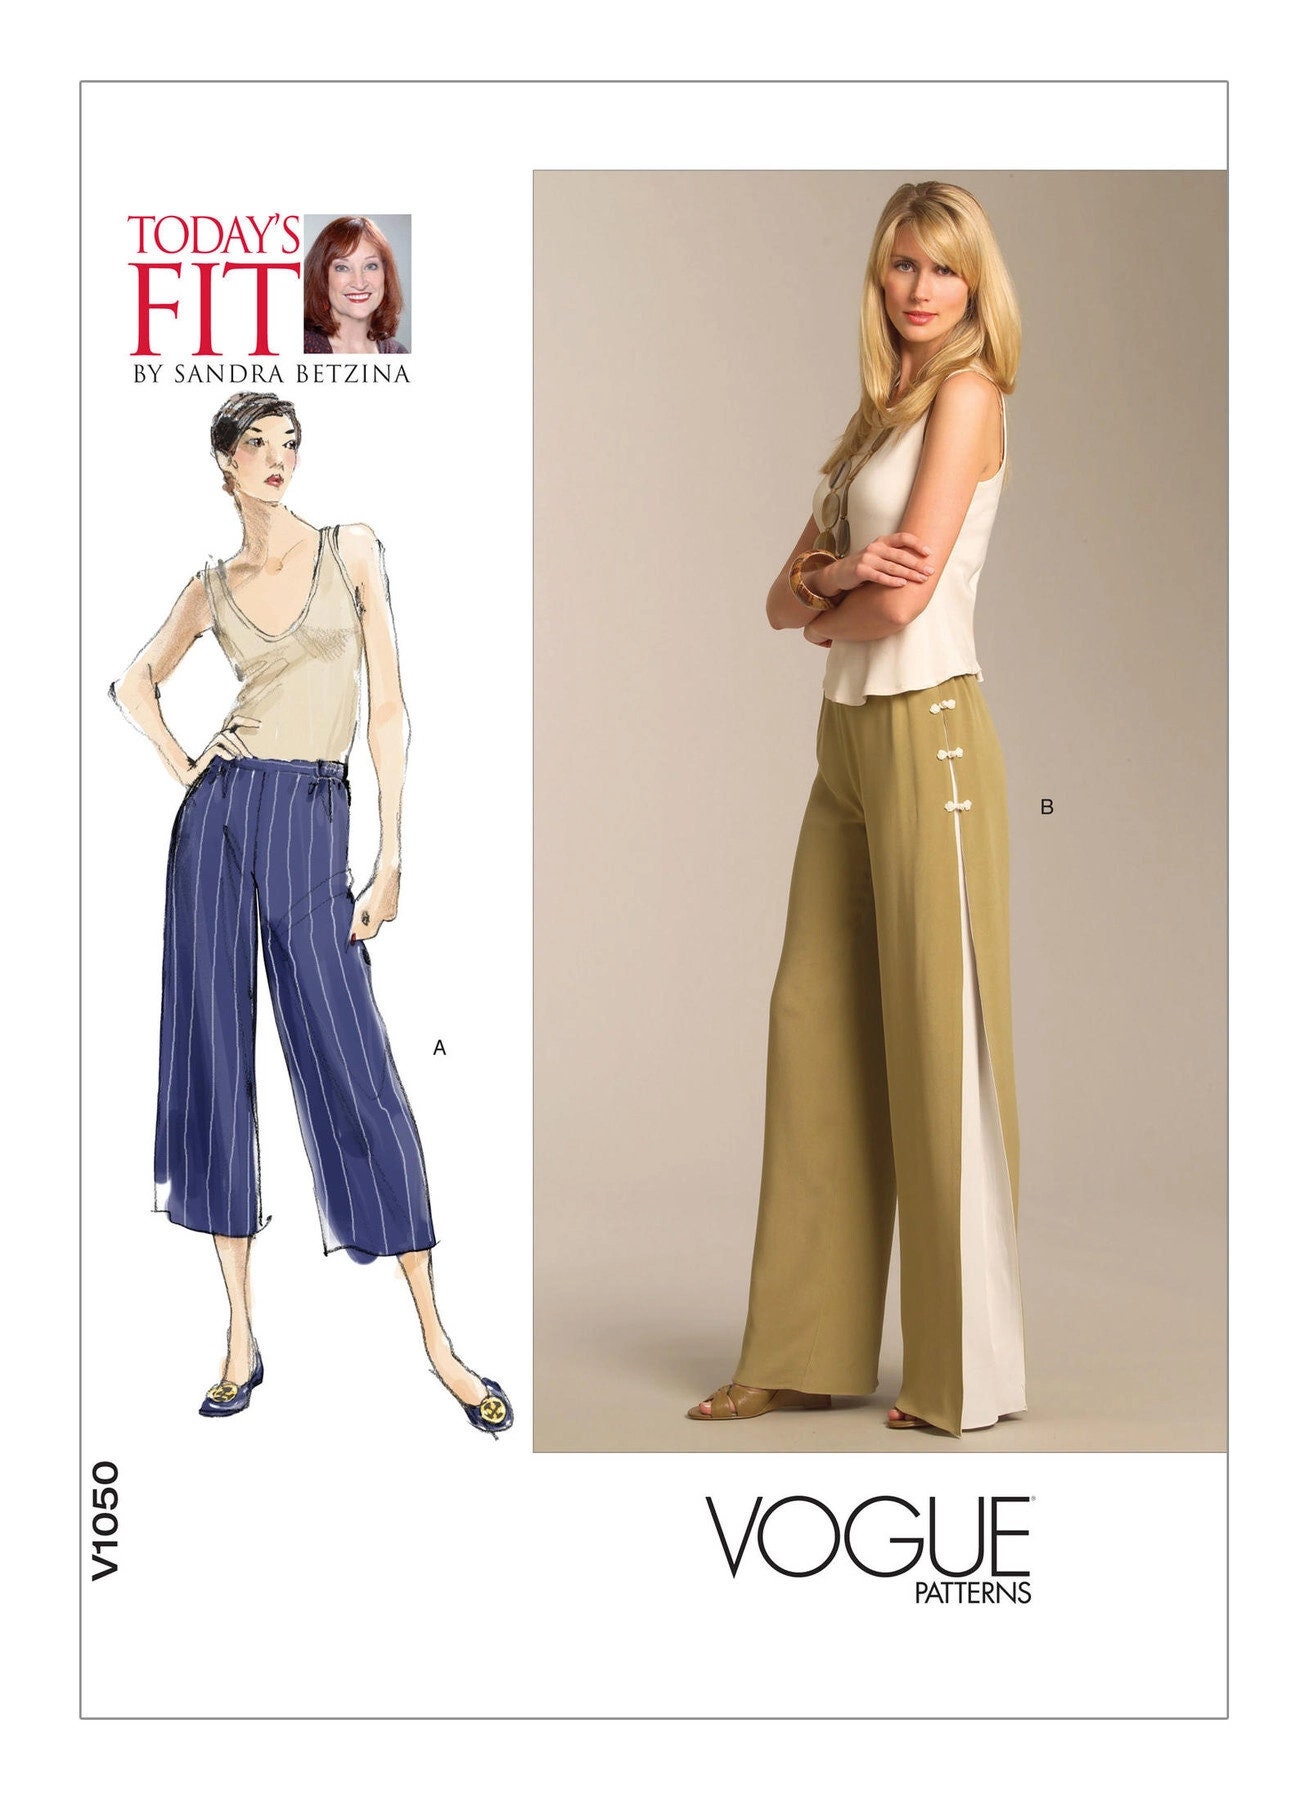 Vogue Sewing Pattern for Women's Pants, Wide Leg Pants, High Waisted Pants,  Cropped Pants, Vogue 1050, All Sizes, Uncut FF 